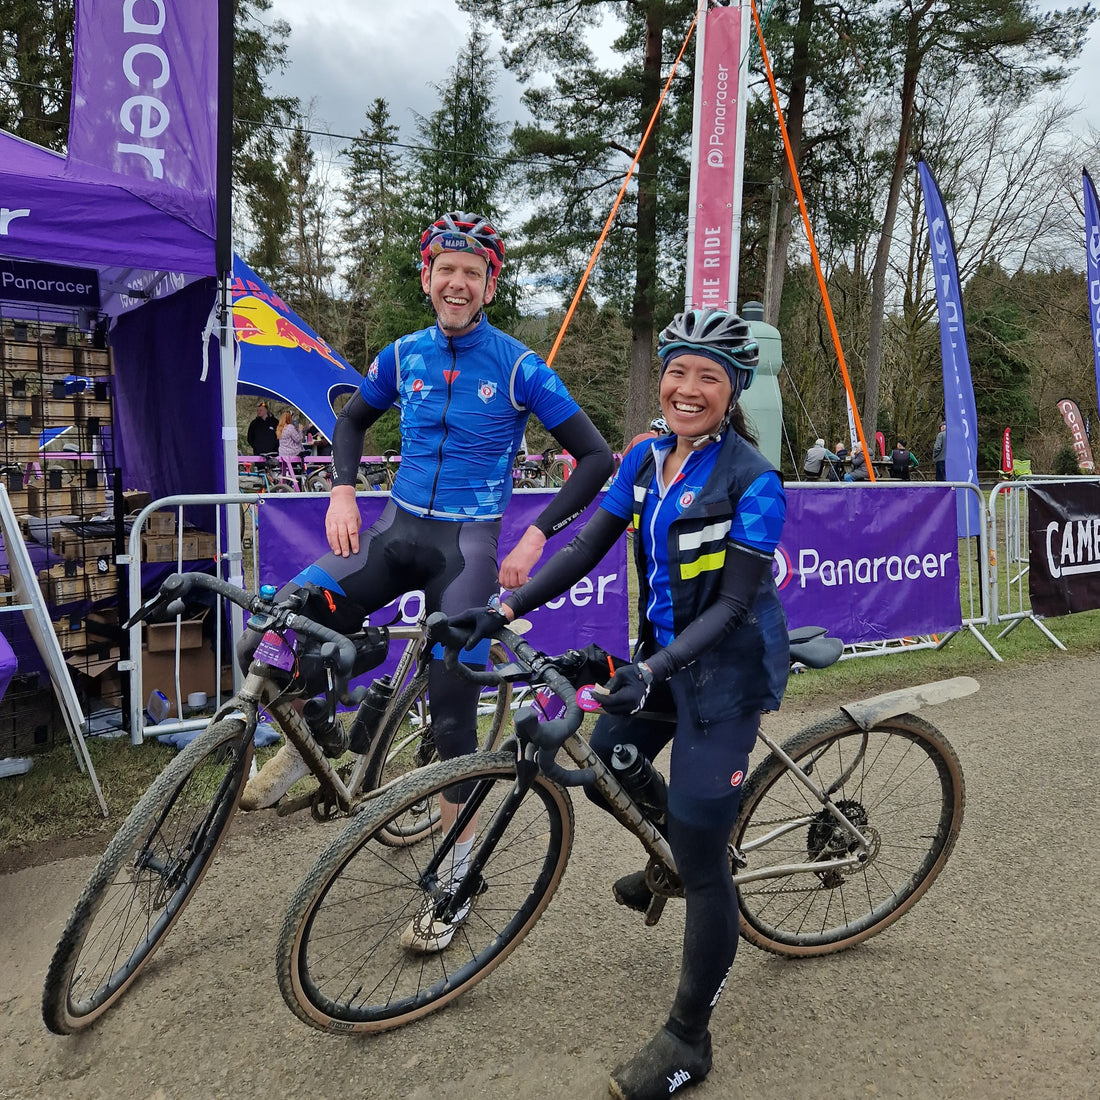 Couple in matching blue jerseys astride bikes smile at the camera.